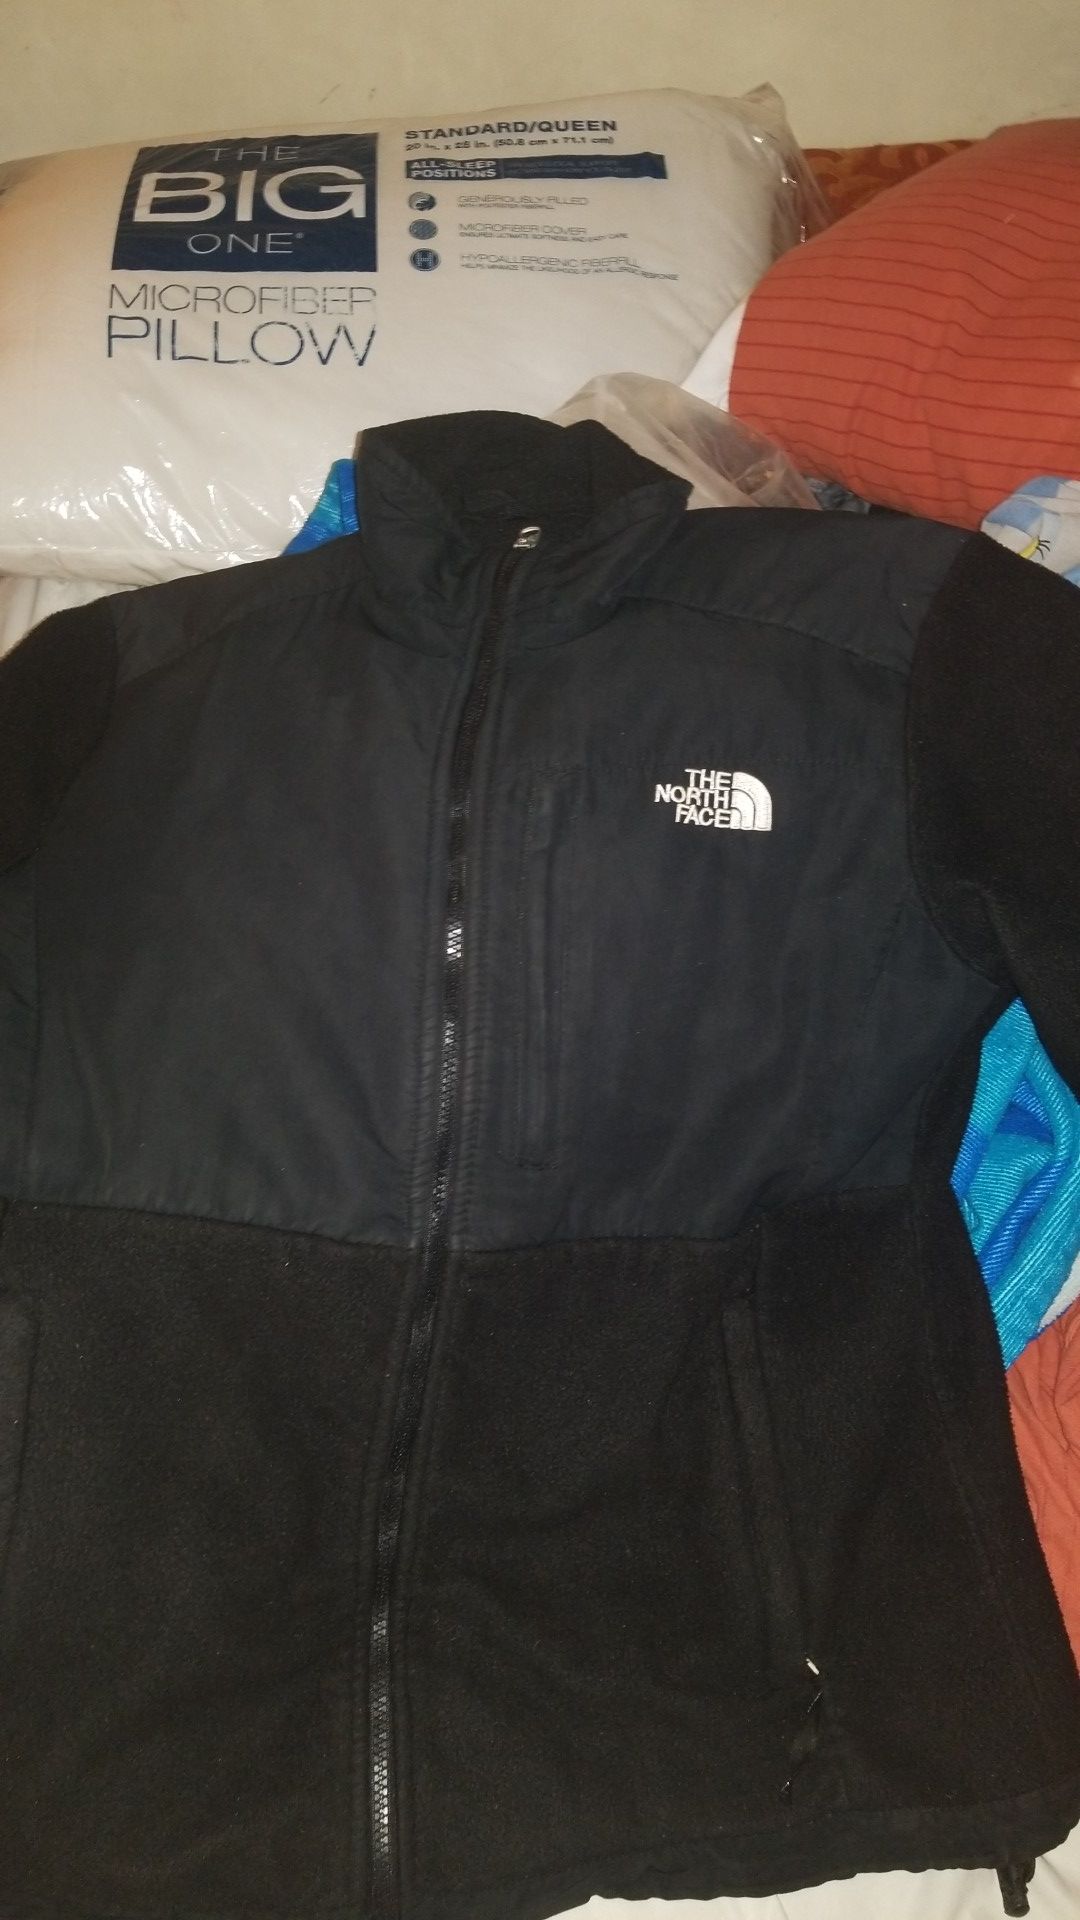 North face jacket good condition